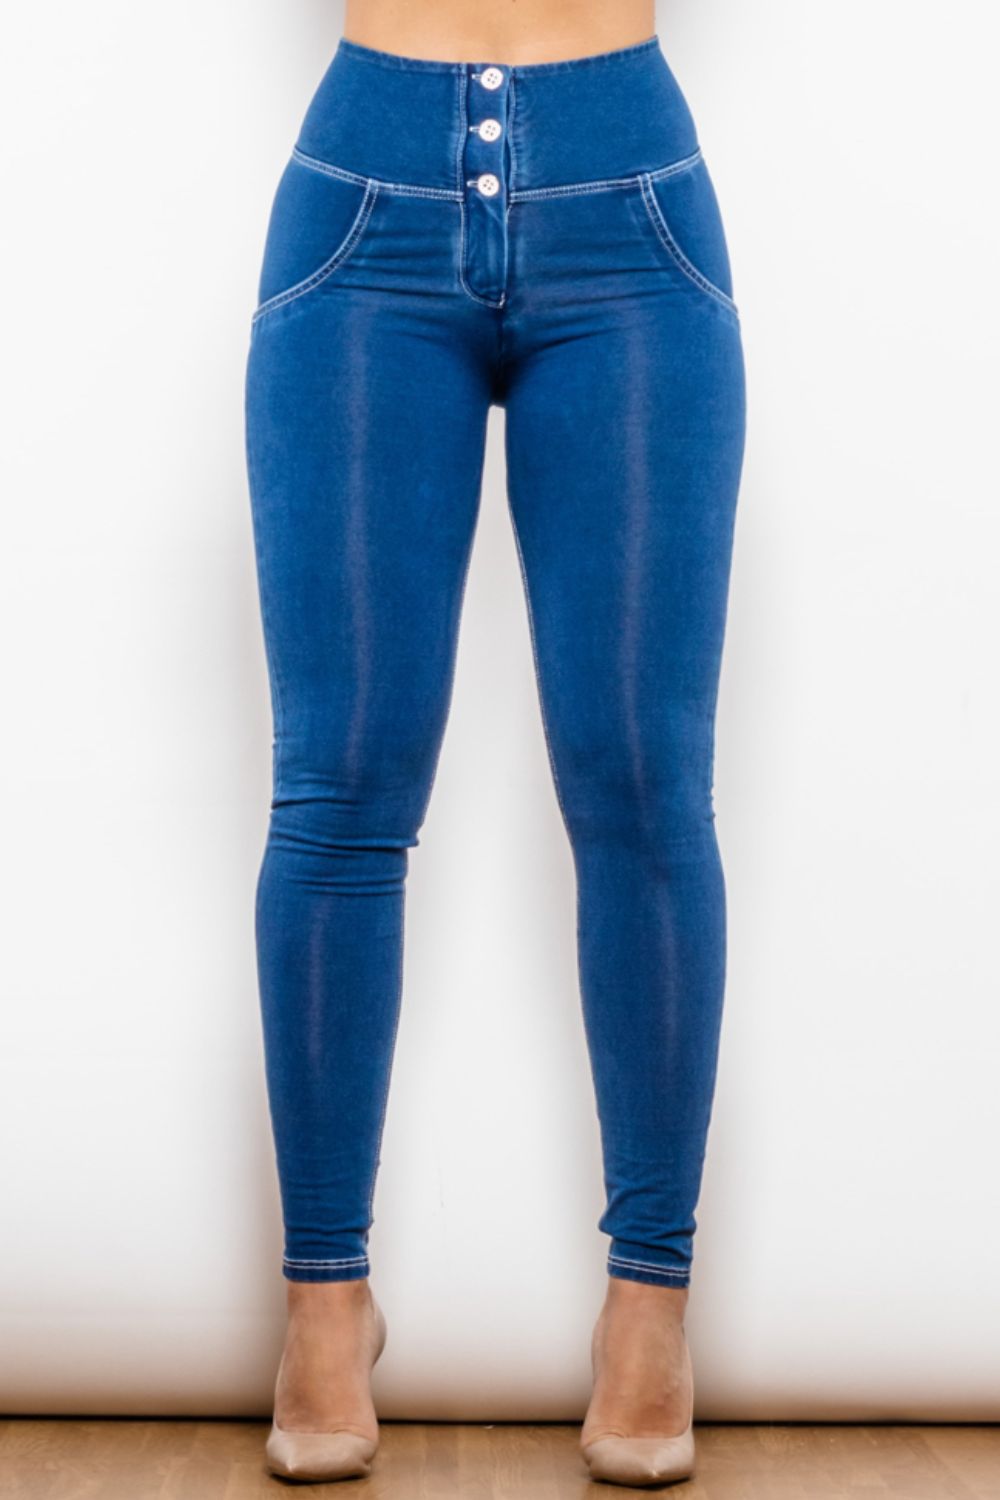 Buttoned Skinny Jeans – High Flyclothing Waist LLC Long